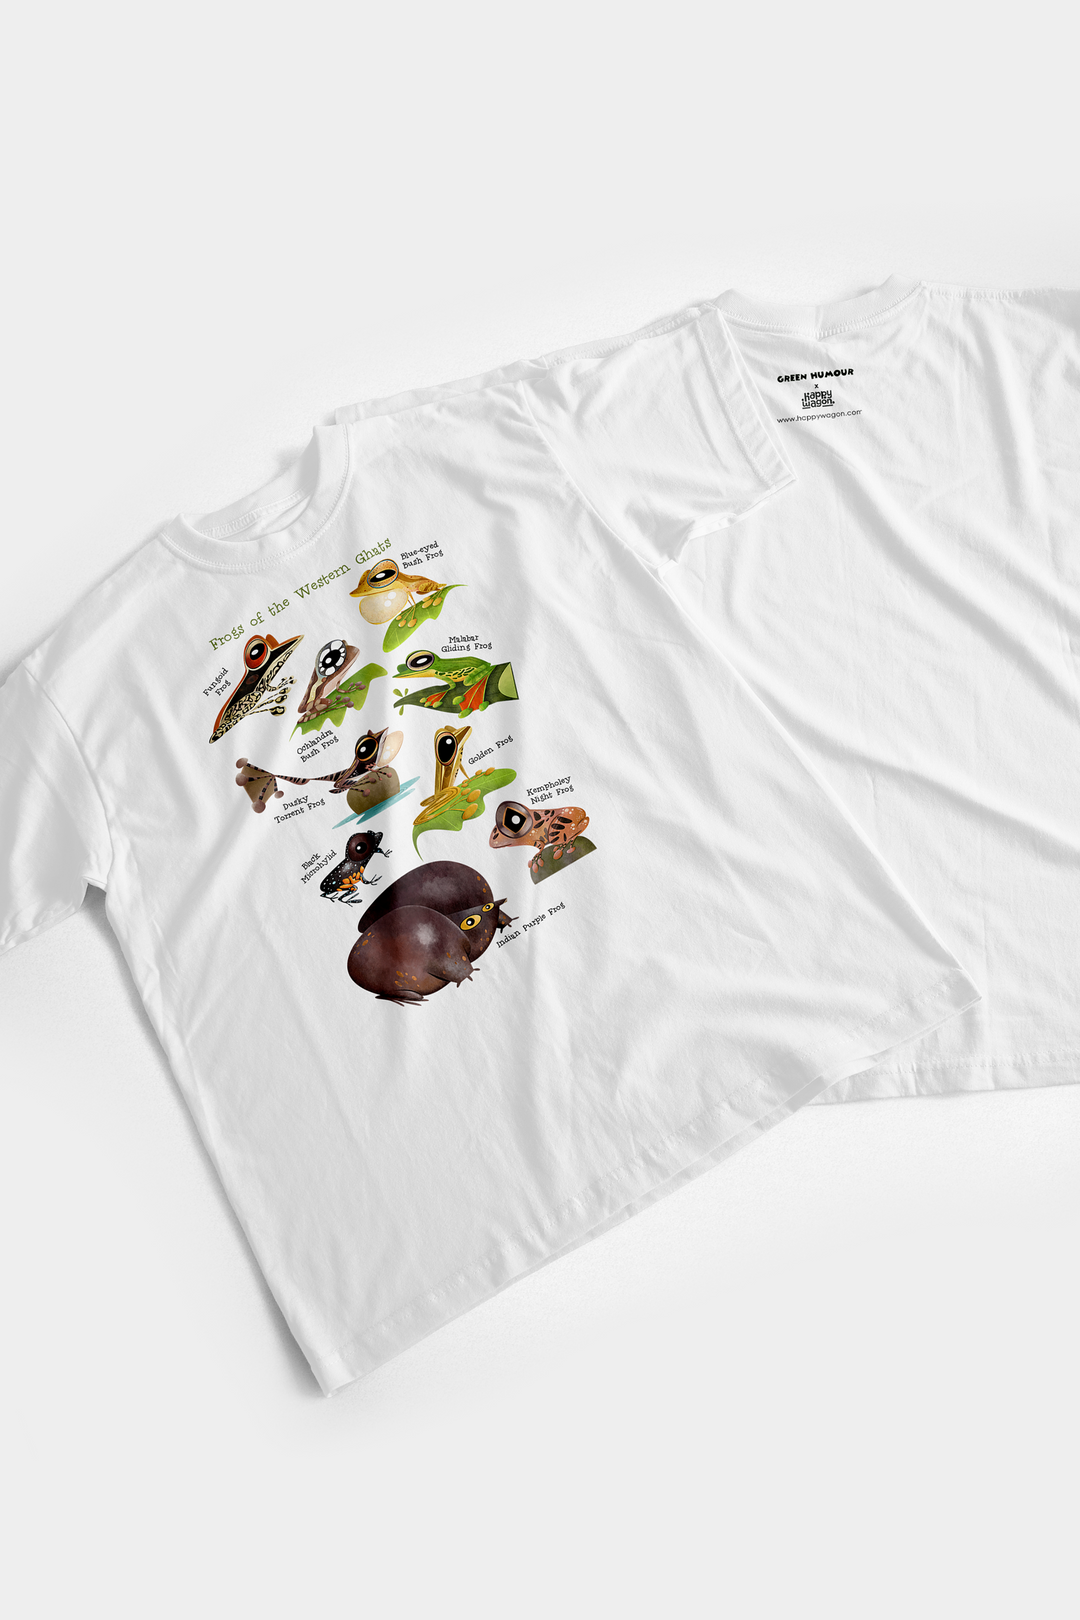 Frogs of Western Ghats T-shirt